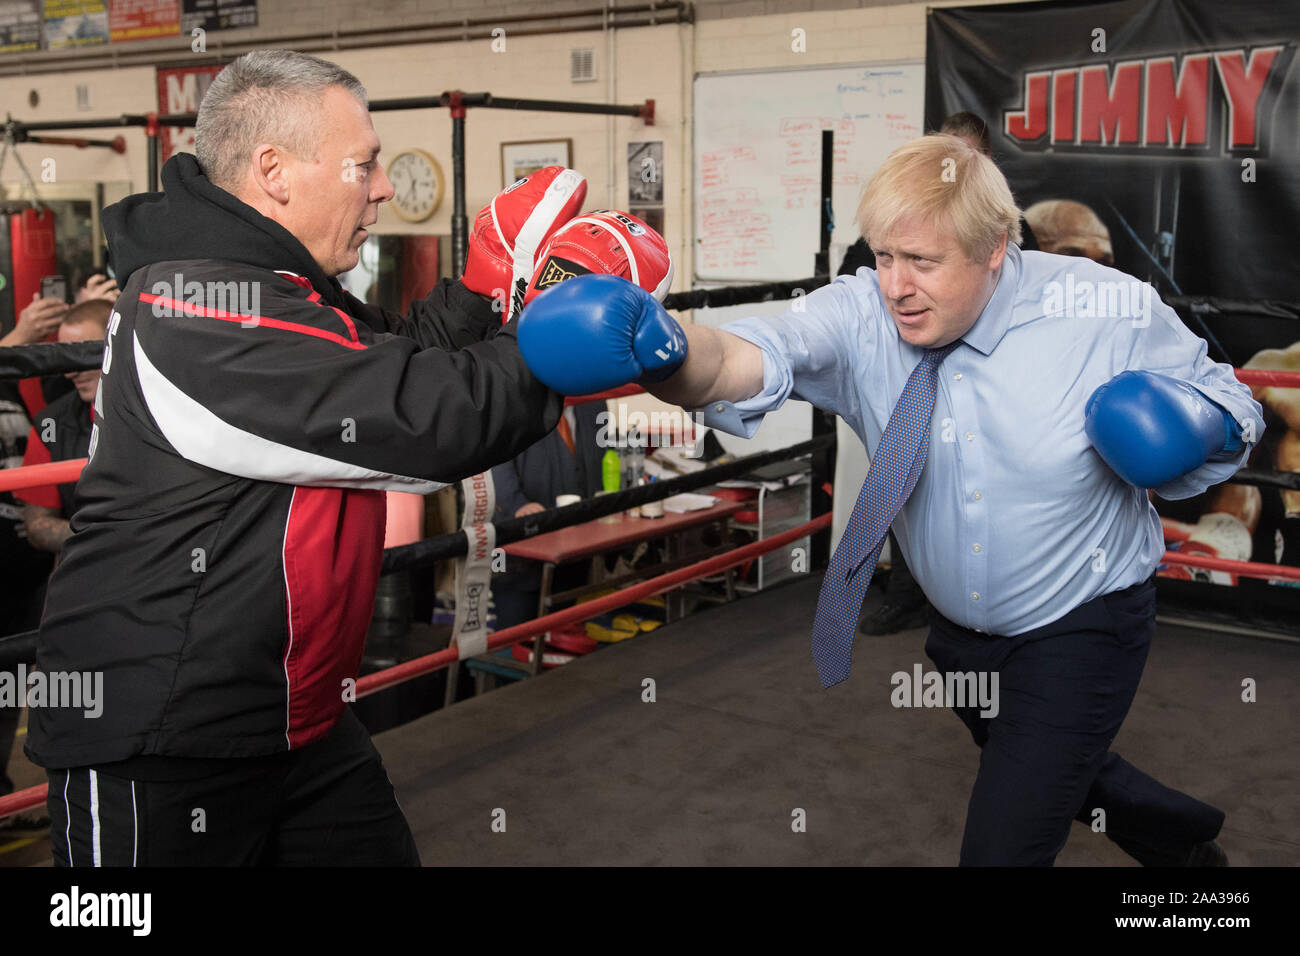 Prime Minister Boris Johnson spars with boxing coach, Steve Egan during a visit to Jimmy Egan's Boxing Academy at Wythenshawe, while on the campaign trail ahead of the General Election. PA Photo. Picture date: Tuesday November 19, 2019. See PA story POLITICS Election. Photo credit should read: Stefan Rousseau/PA Wire Stock Photo